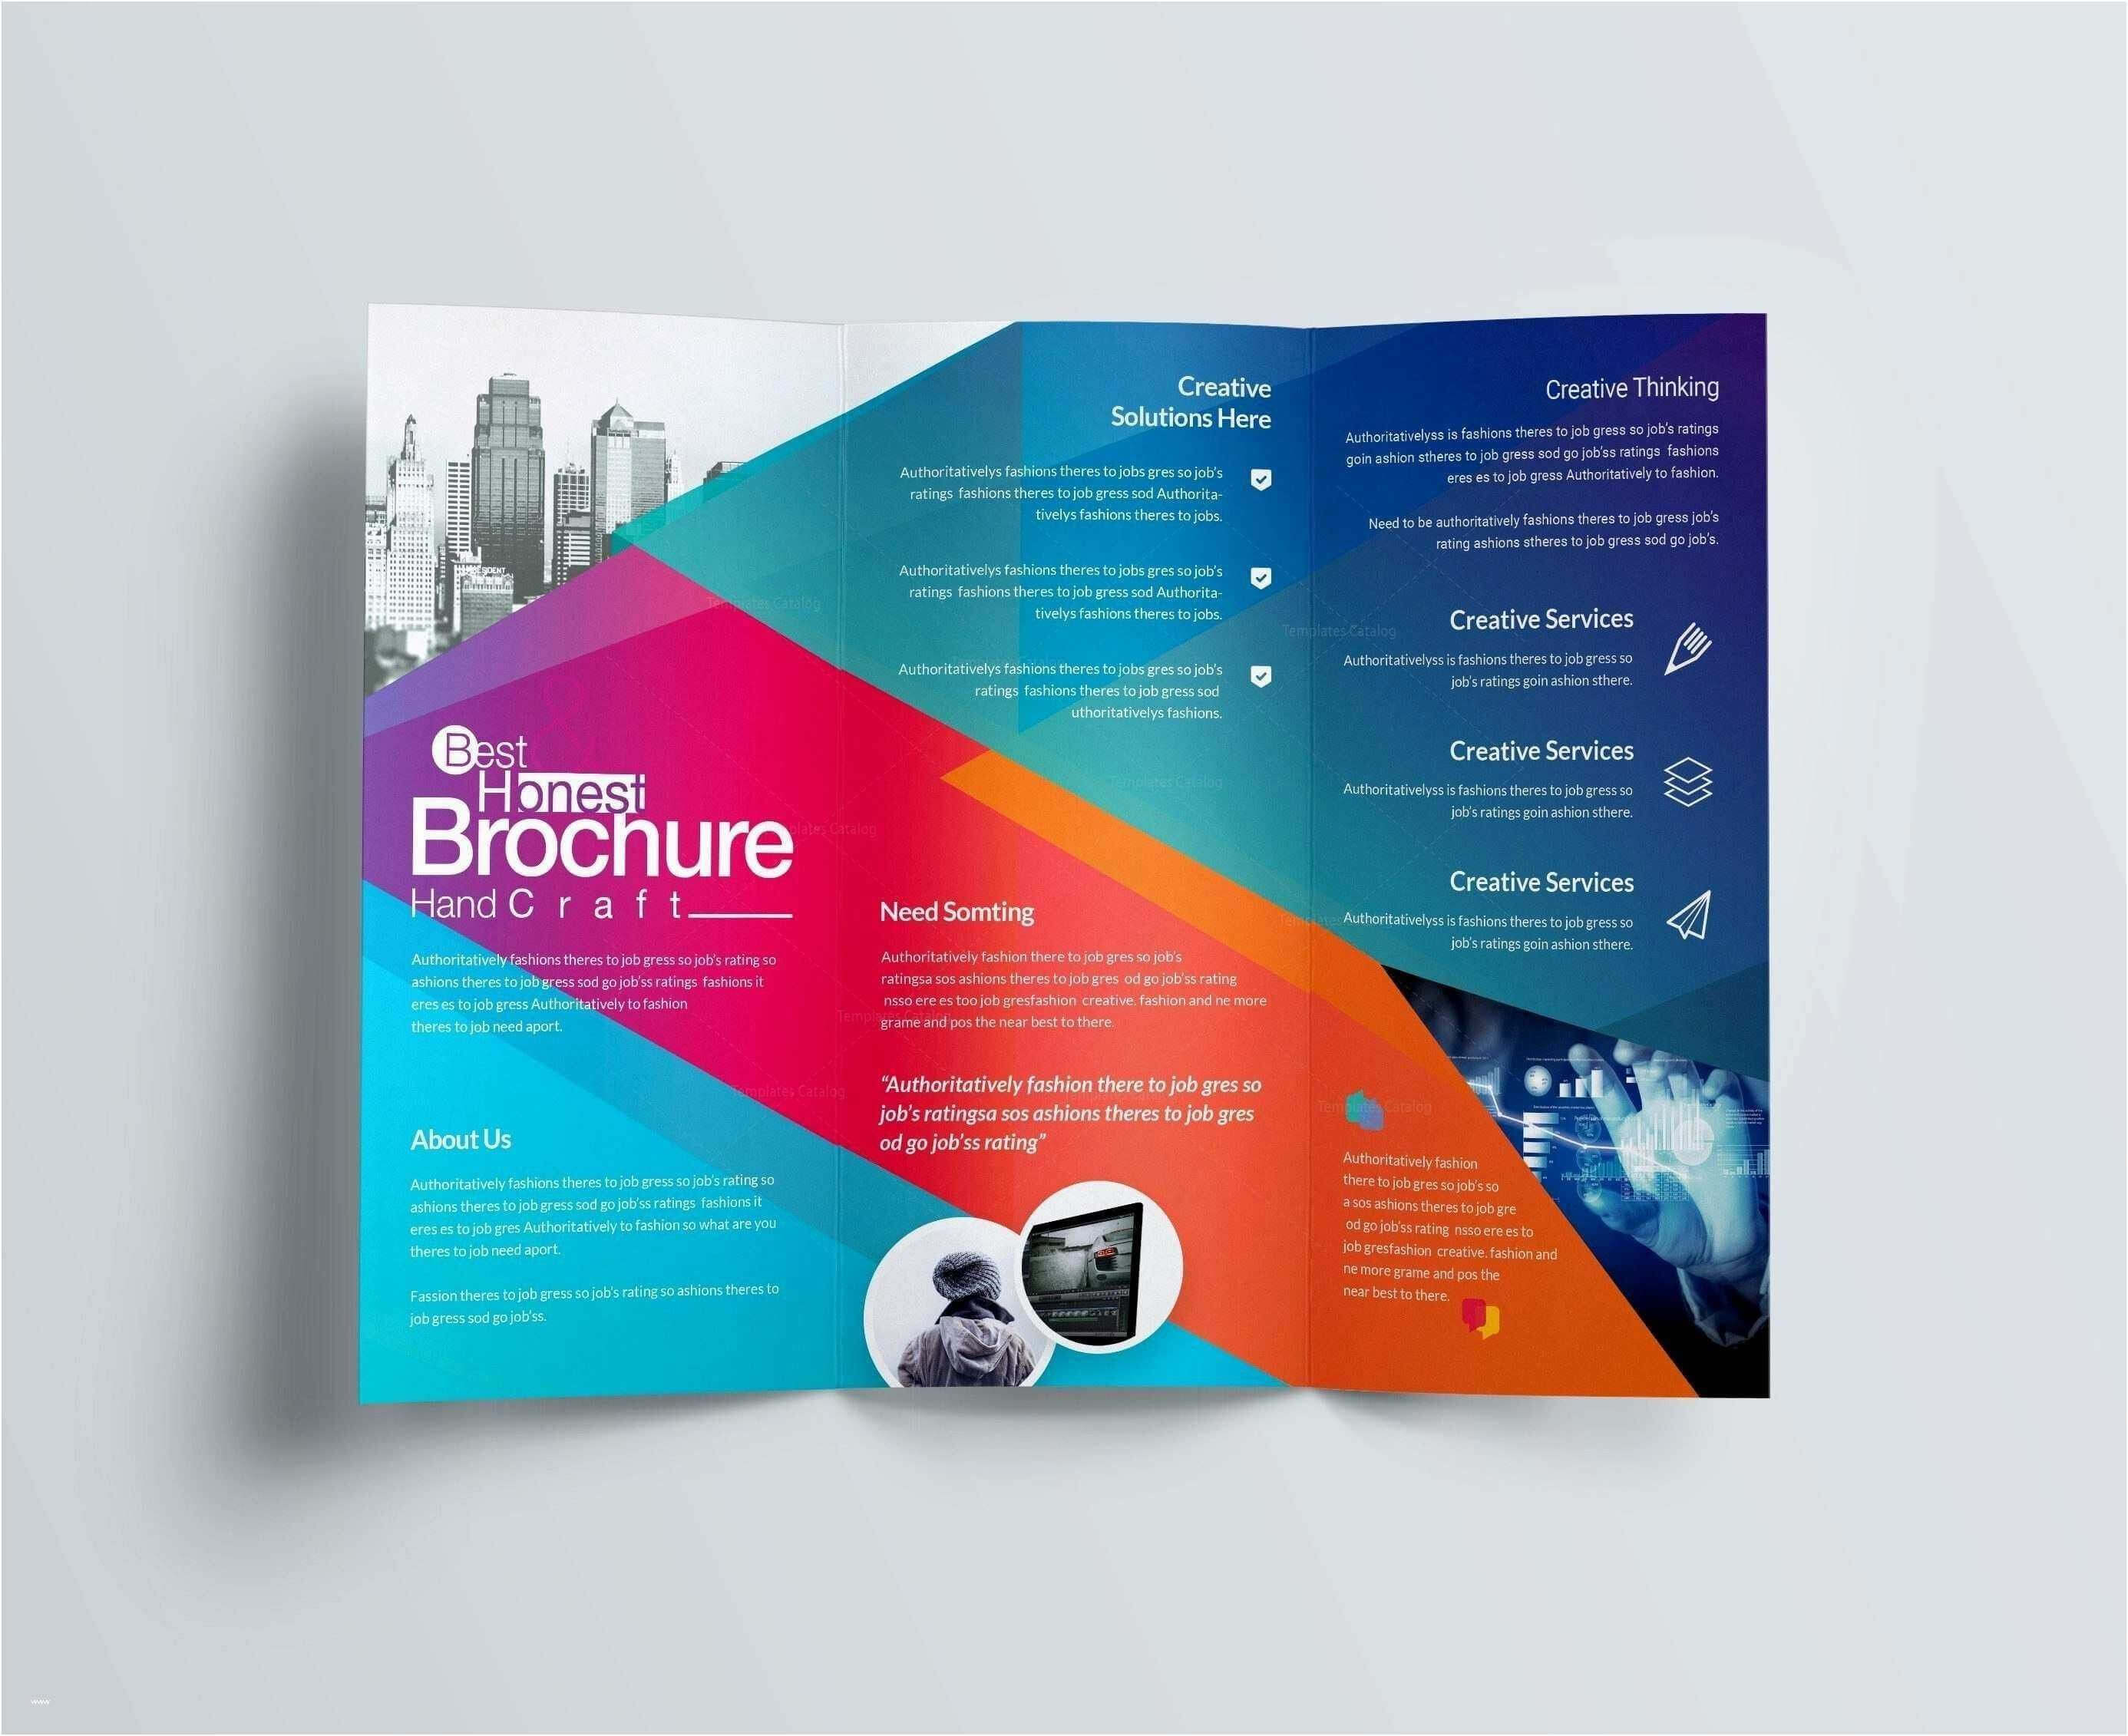 Free Powerpoint Templates For Mac Borders 2018 Microsoft Pertaining To Mac Brochure Templates